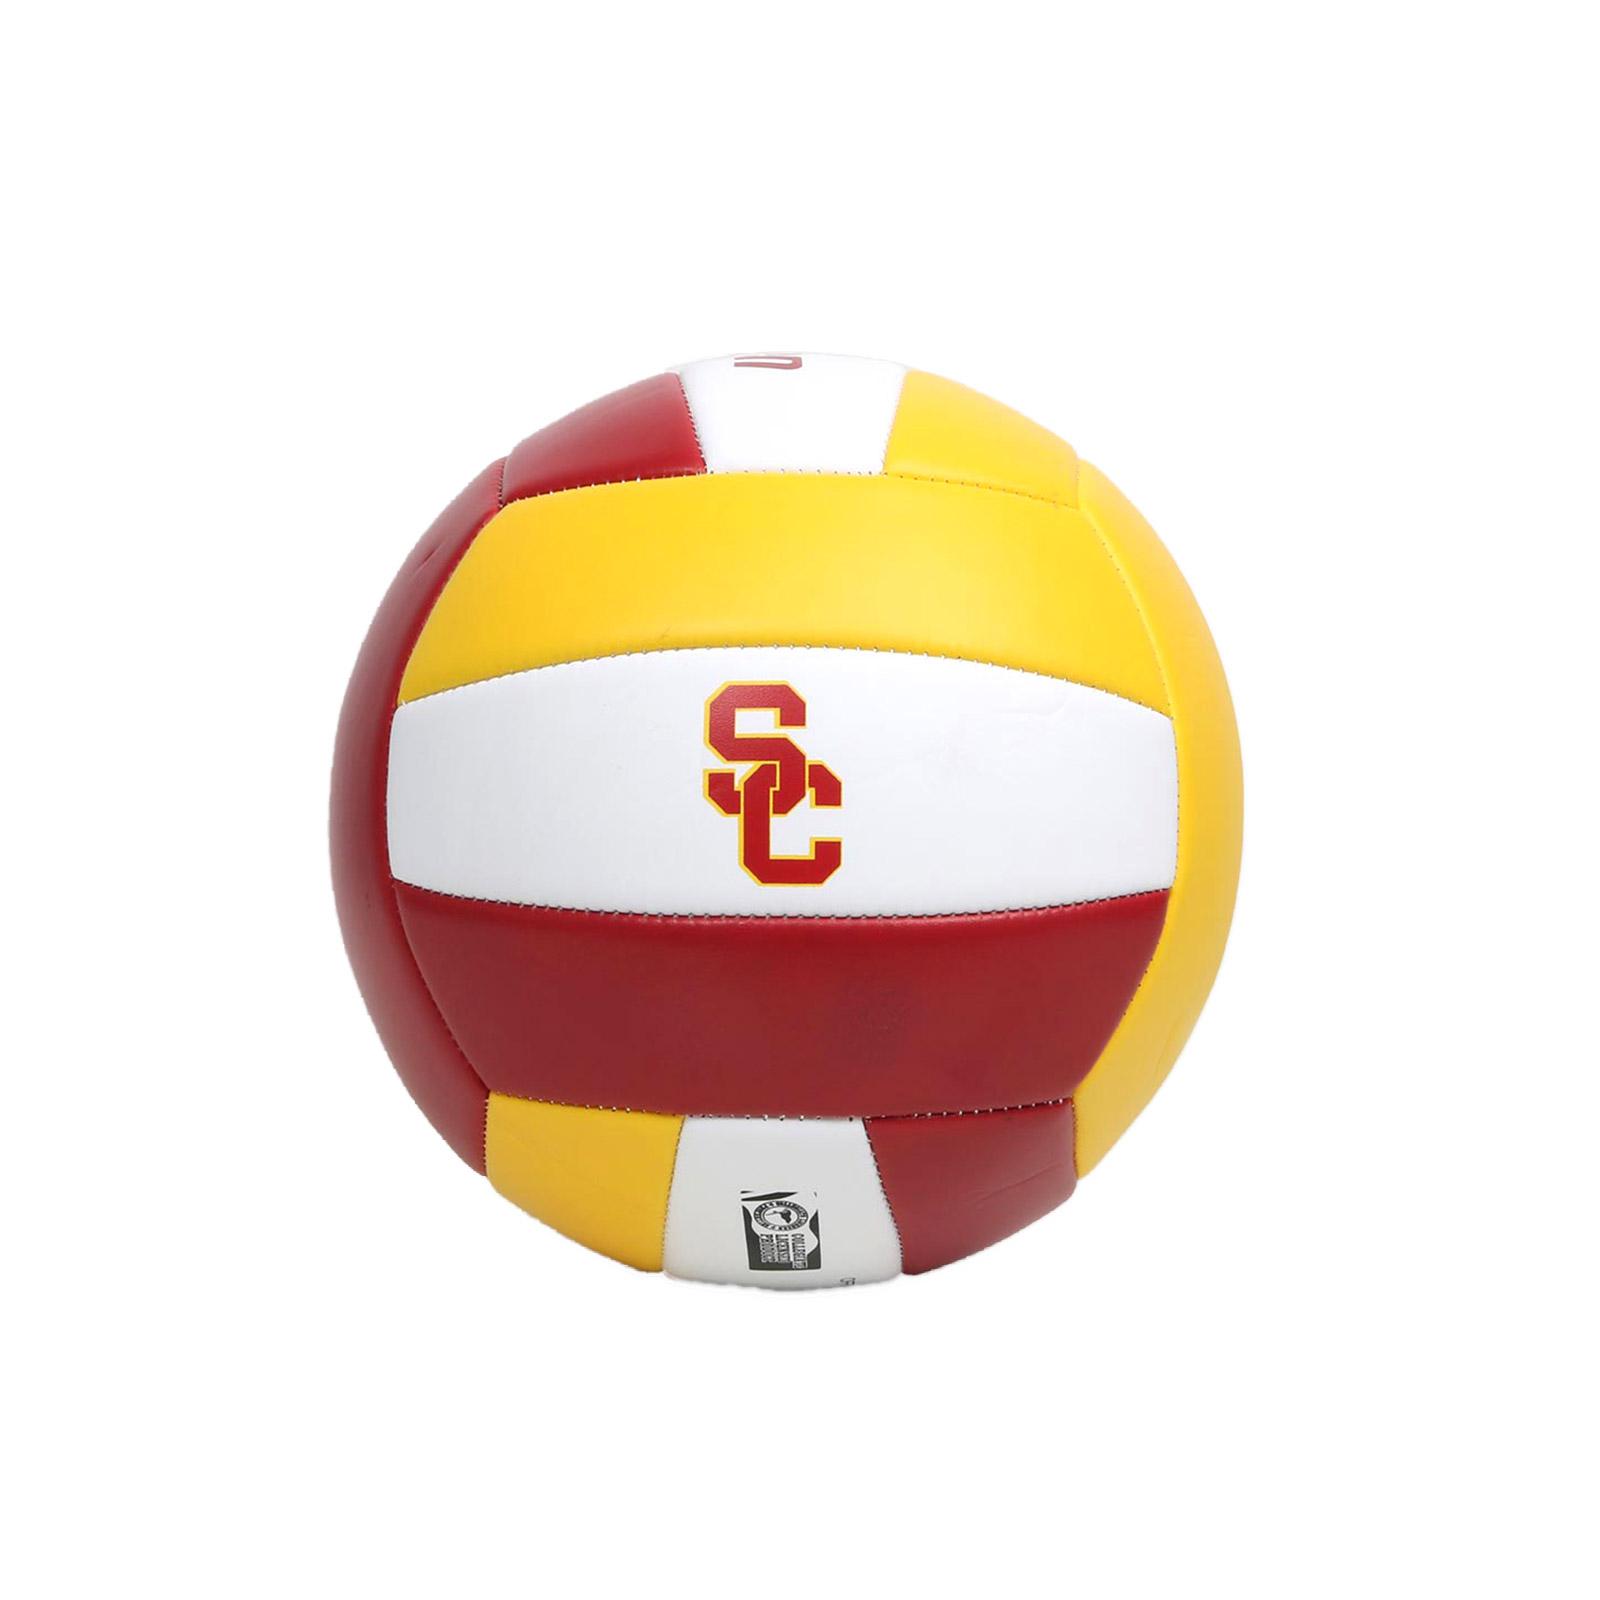 SC Interlock Volleyball Official Size image11